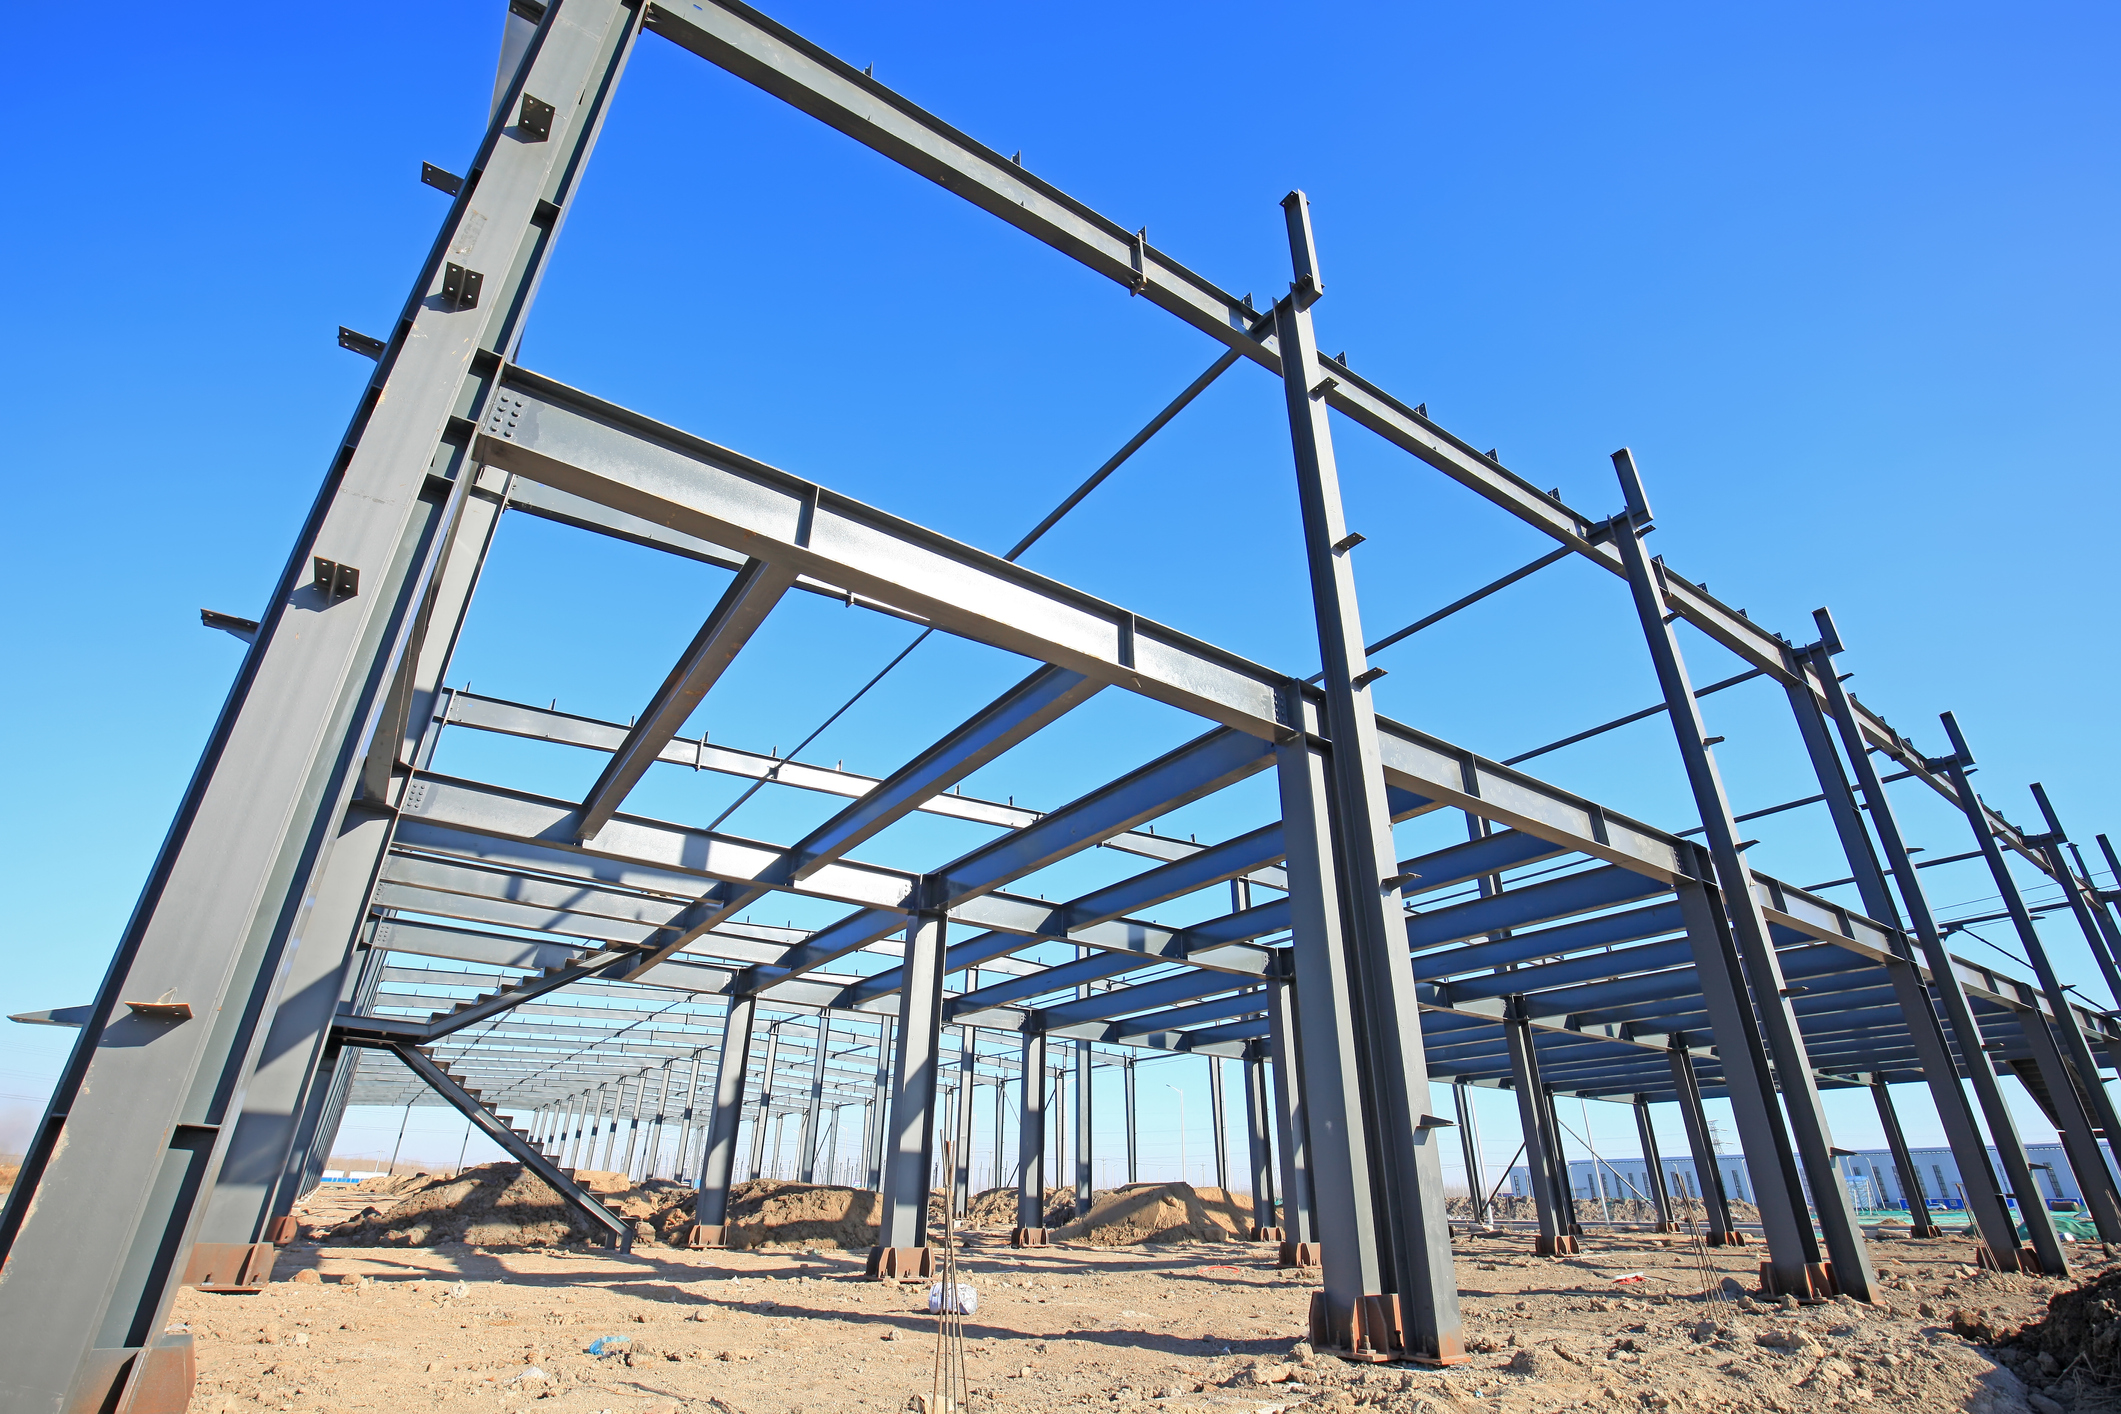 GettyImages 1144513161 - All You Need to Know About Retail Steel Buildings